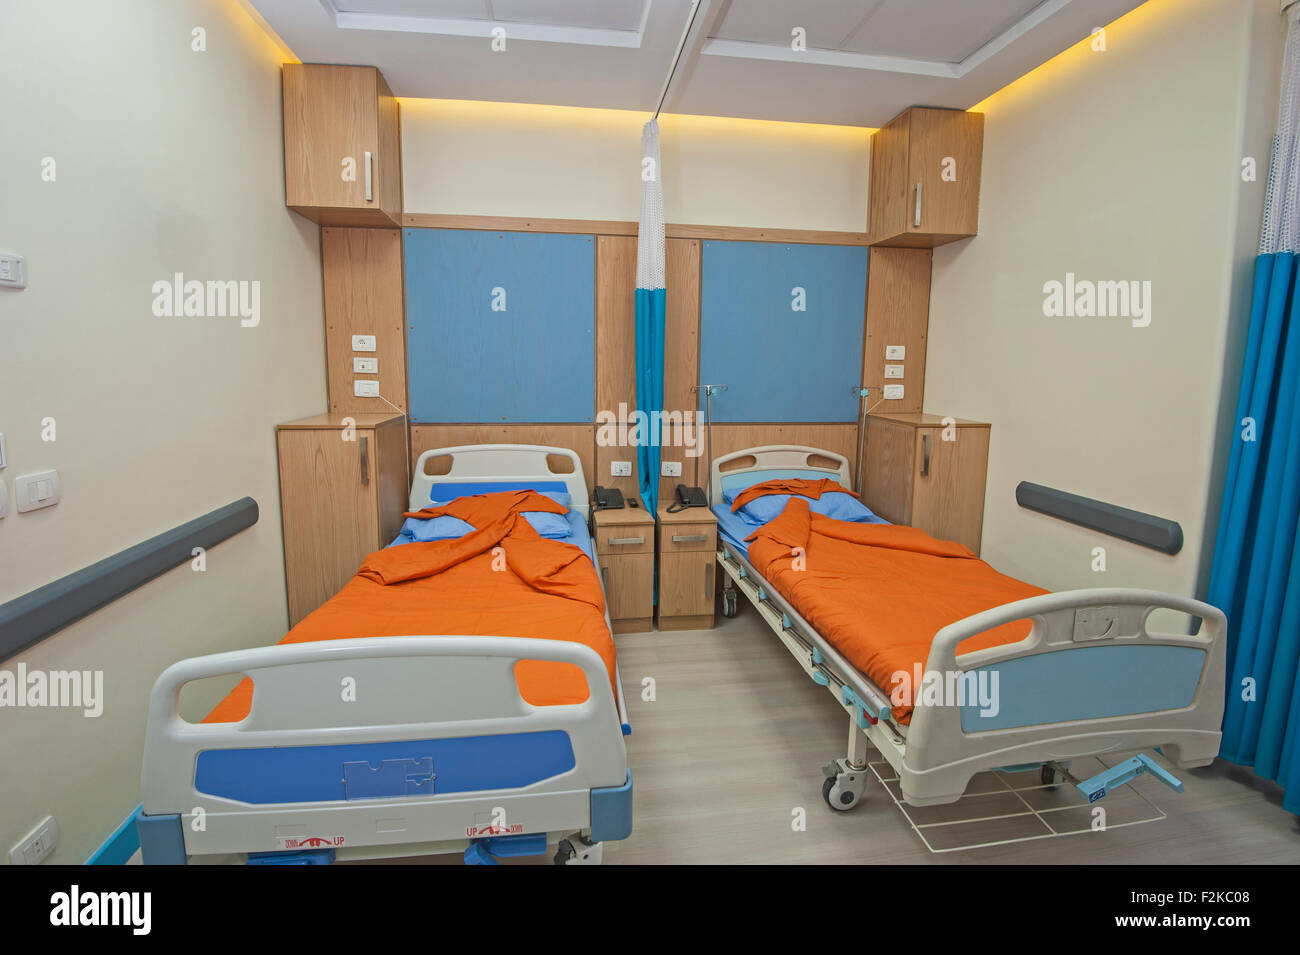 Hospital beds in a private hospital ward Stock Photo